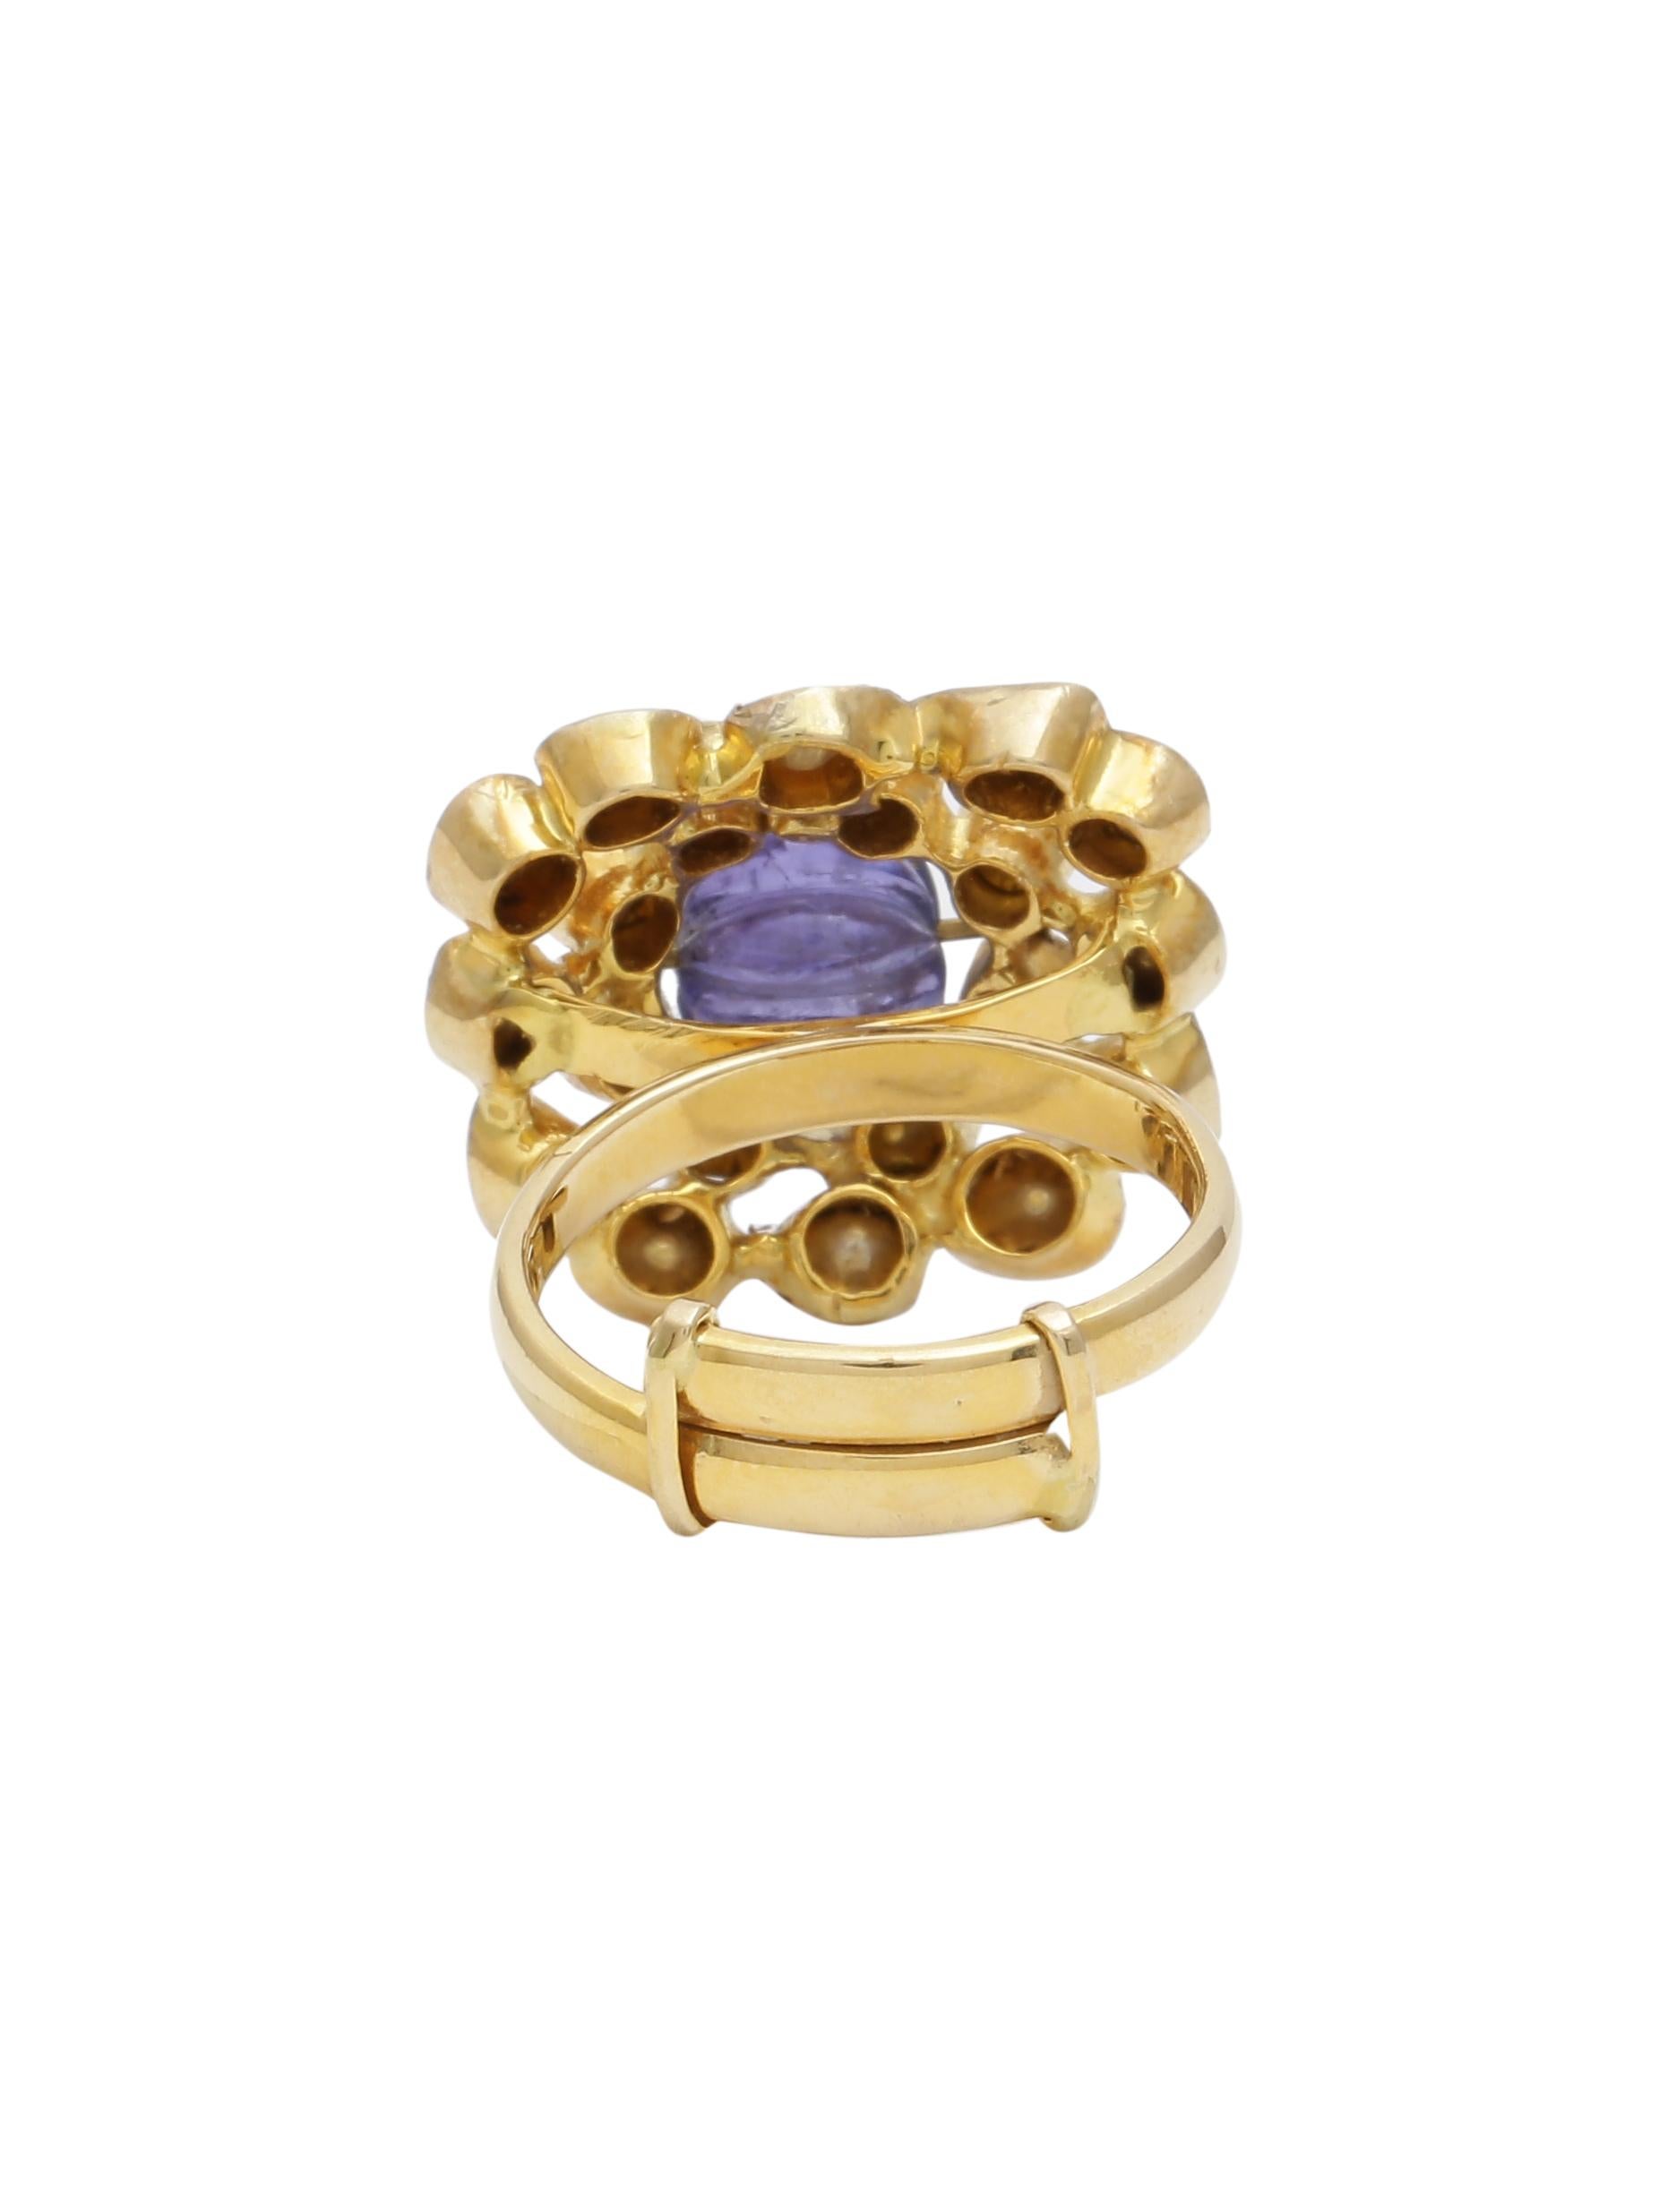 A beautiful cocktail ring with a carved Tanzanite Bead in the centre with uncut diamonds all around . The Beads is fixed with Gold wire in the ring. The ring size is adjustable with the special mechanism on the band. The ring is handmade in 18K